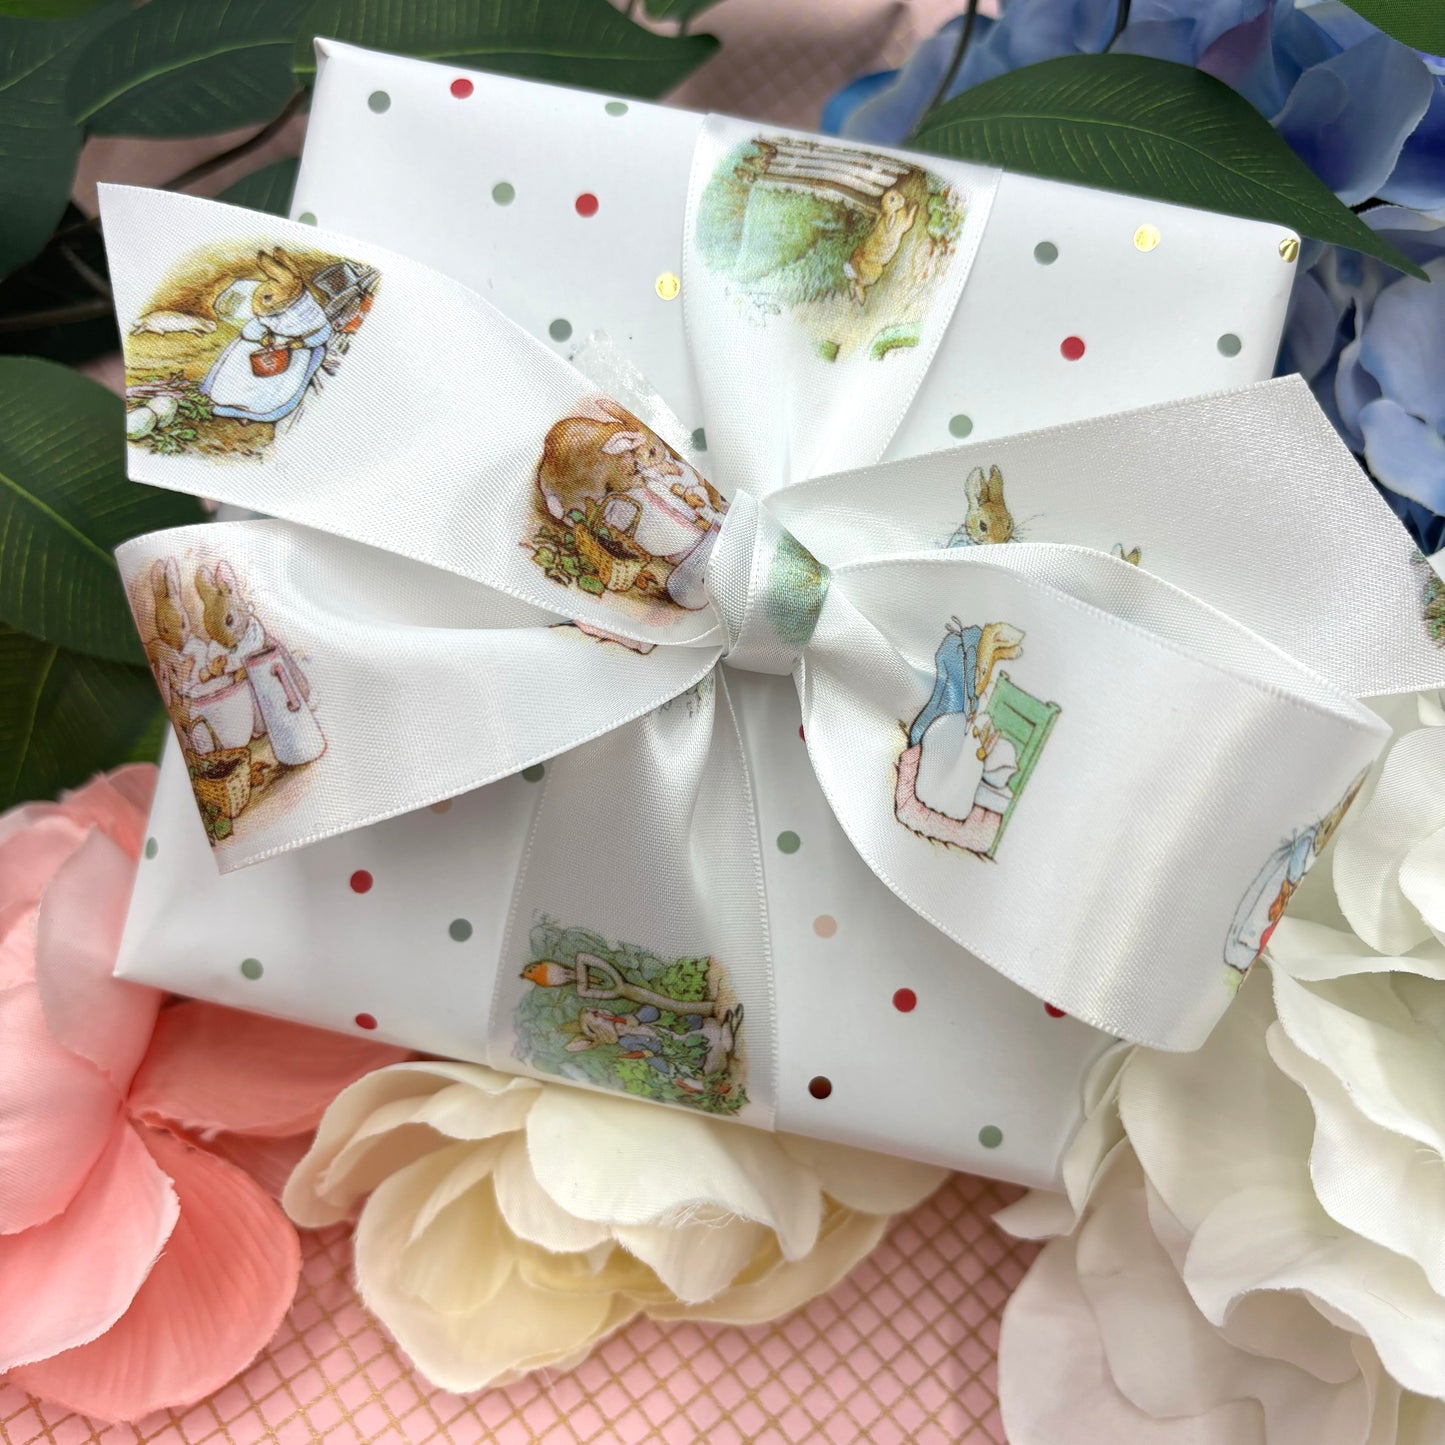 Bunny ribbon, rabbits in a blue jacket of storybook fame printed on 1.5" white satin and grosgrain